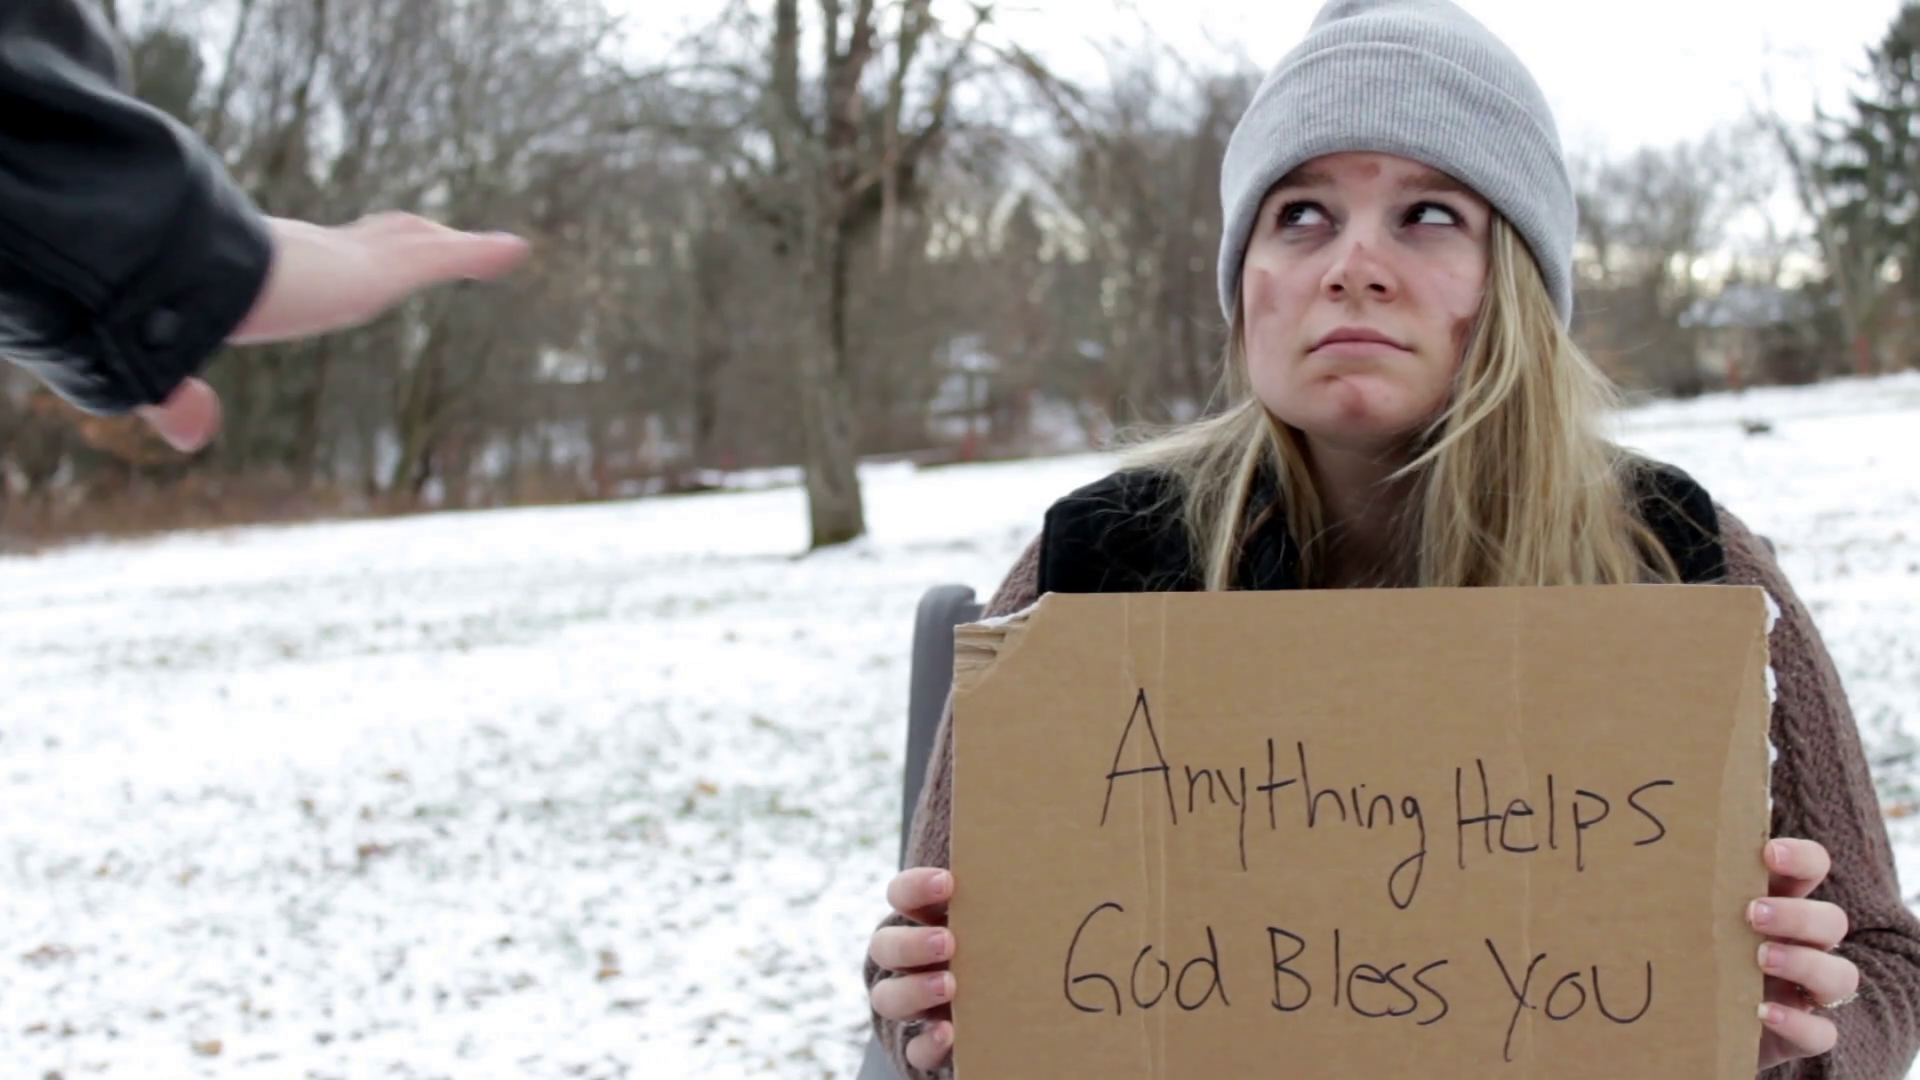 Man Walks By Begging Homeless Woman In Local Park During Winter ...